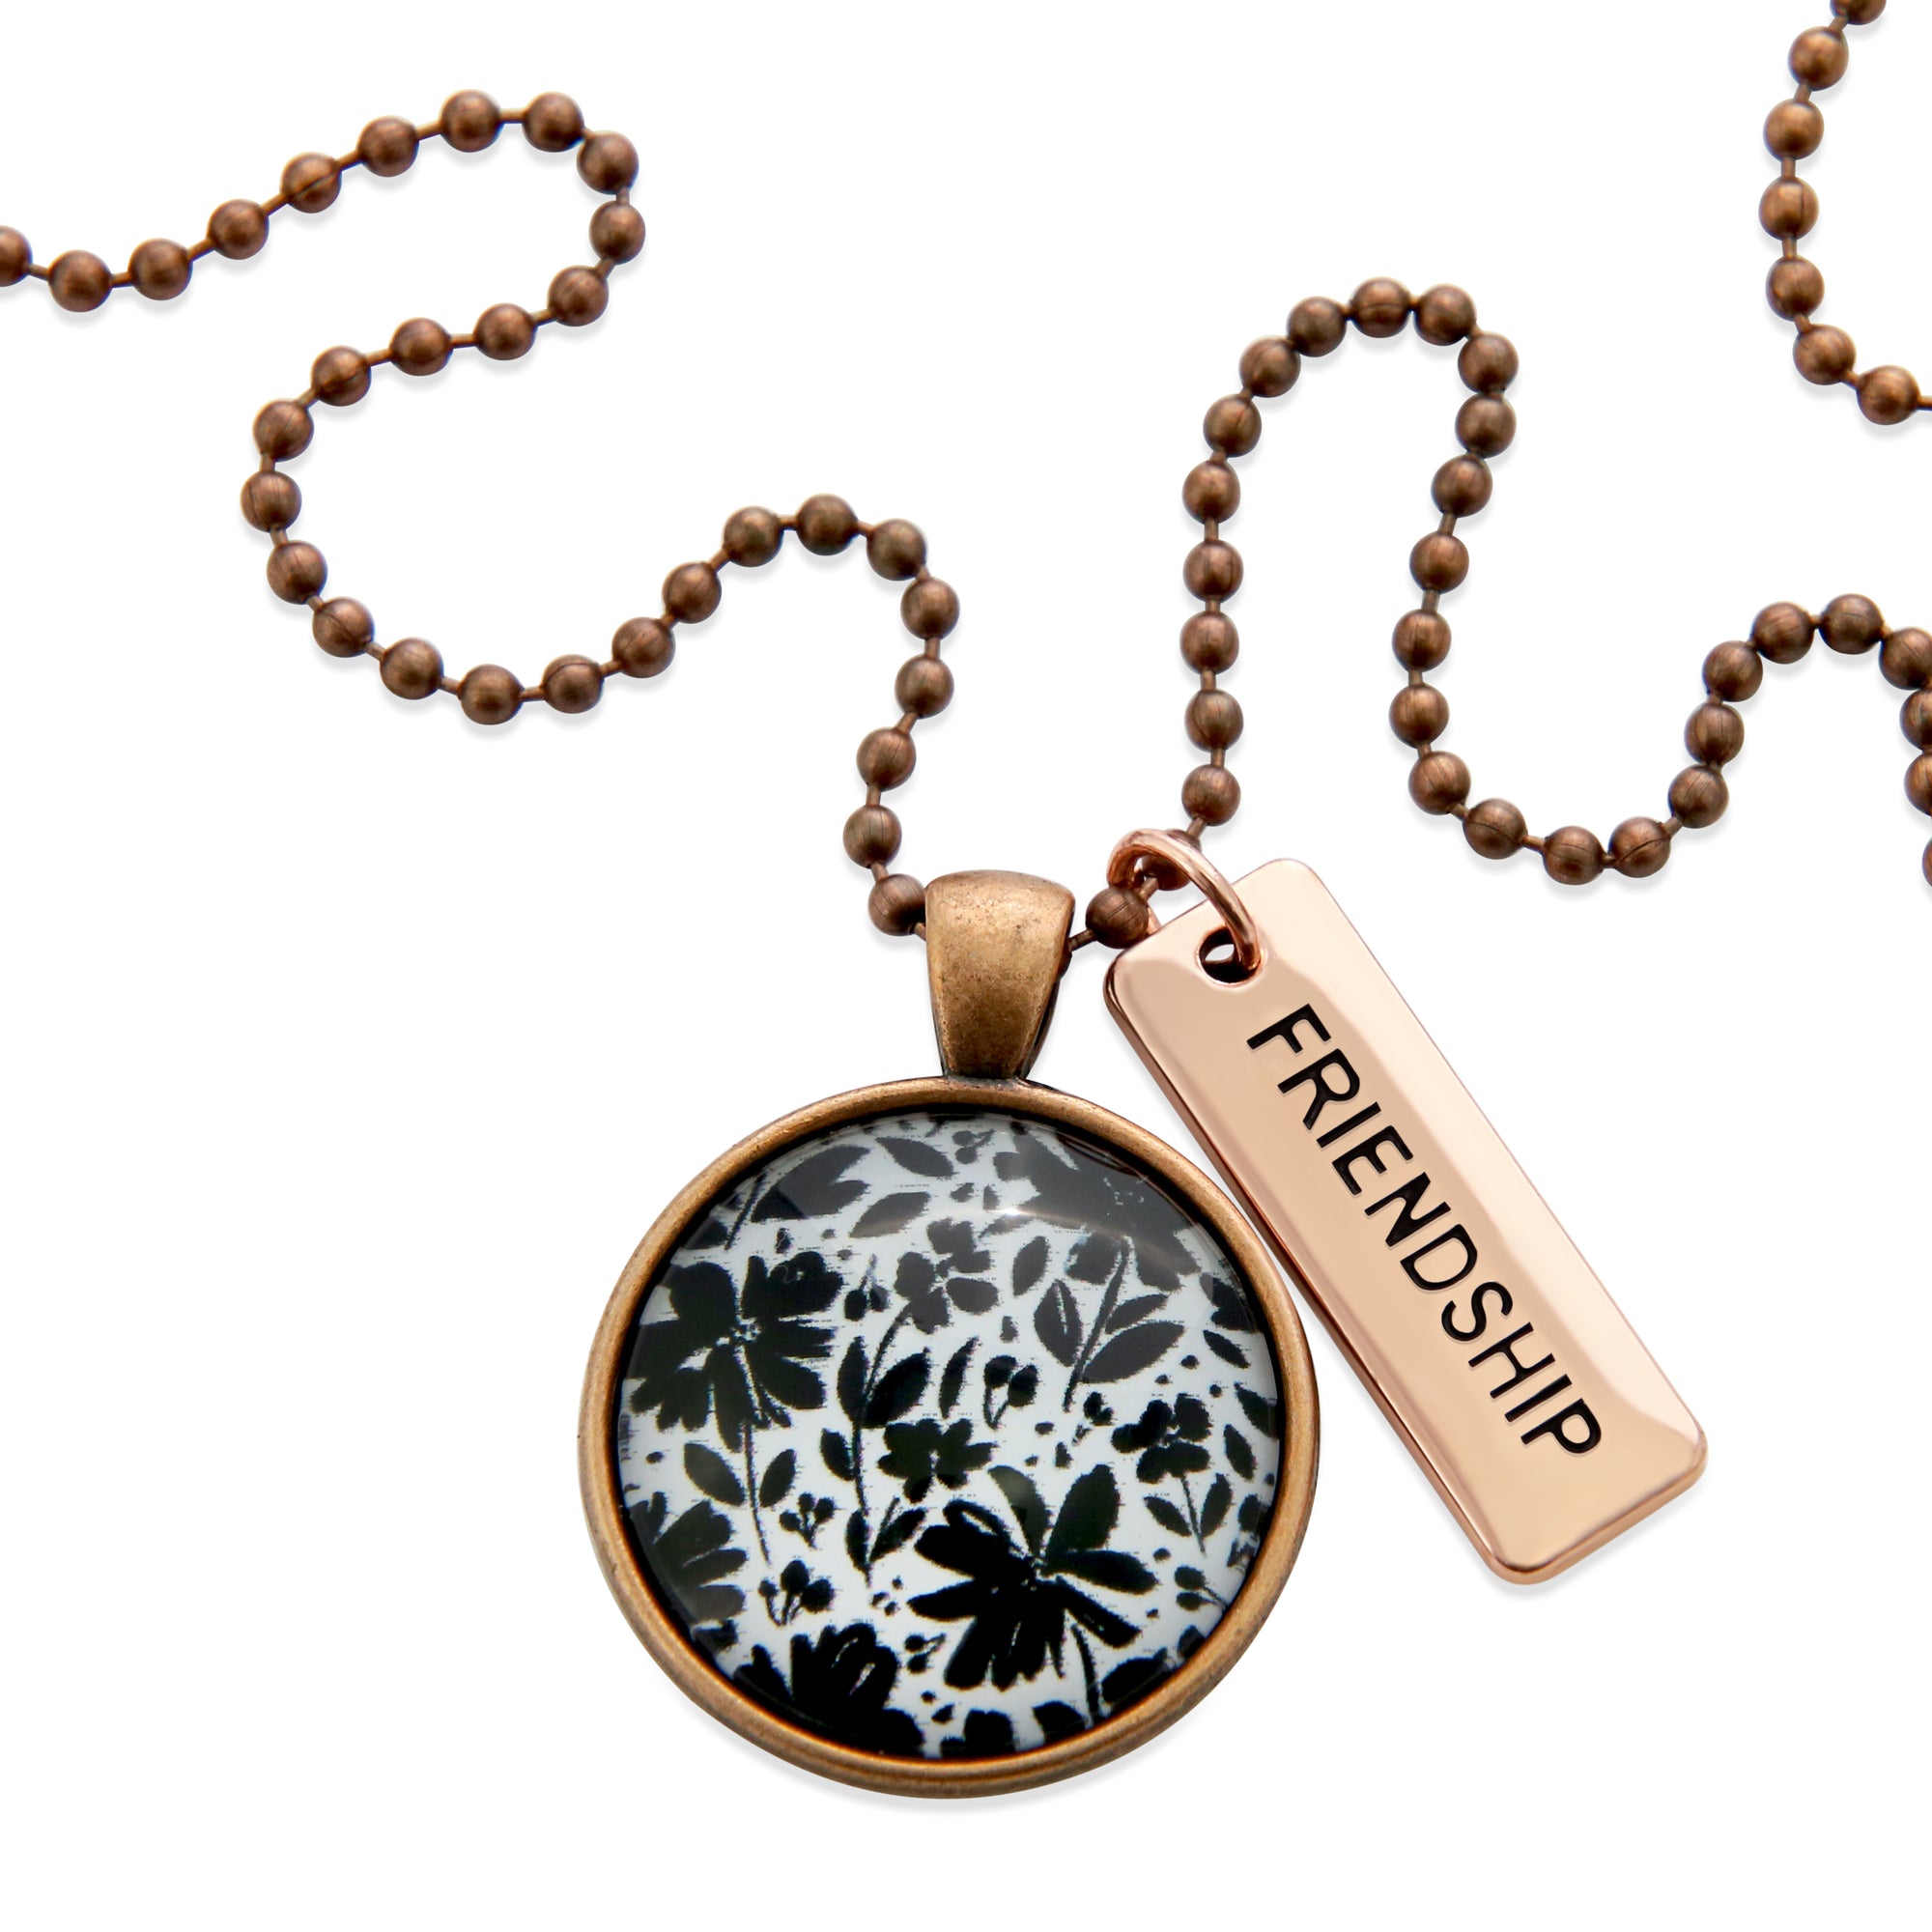 Black & White Collection - Vintage Copper 'FRIENDSHIP' Necklace - Inky Buds (10635)